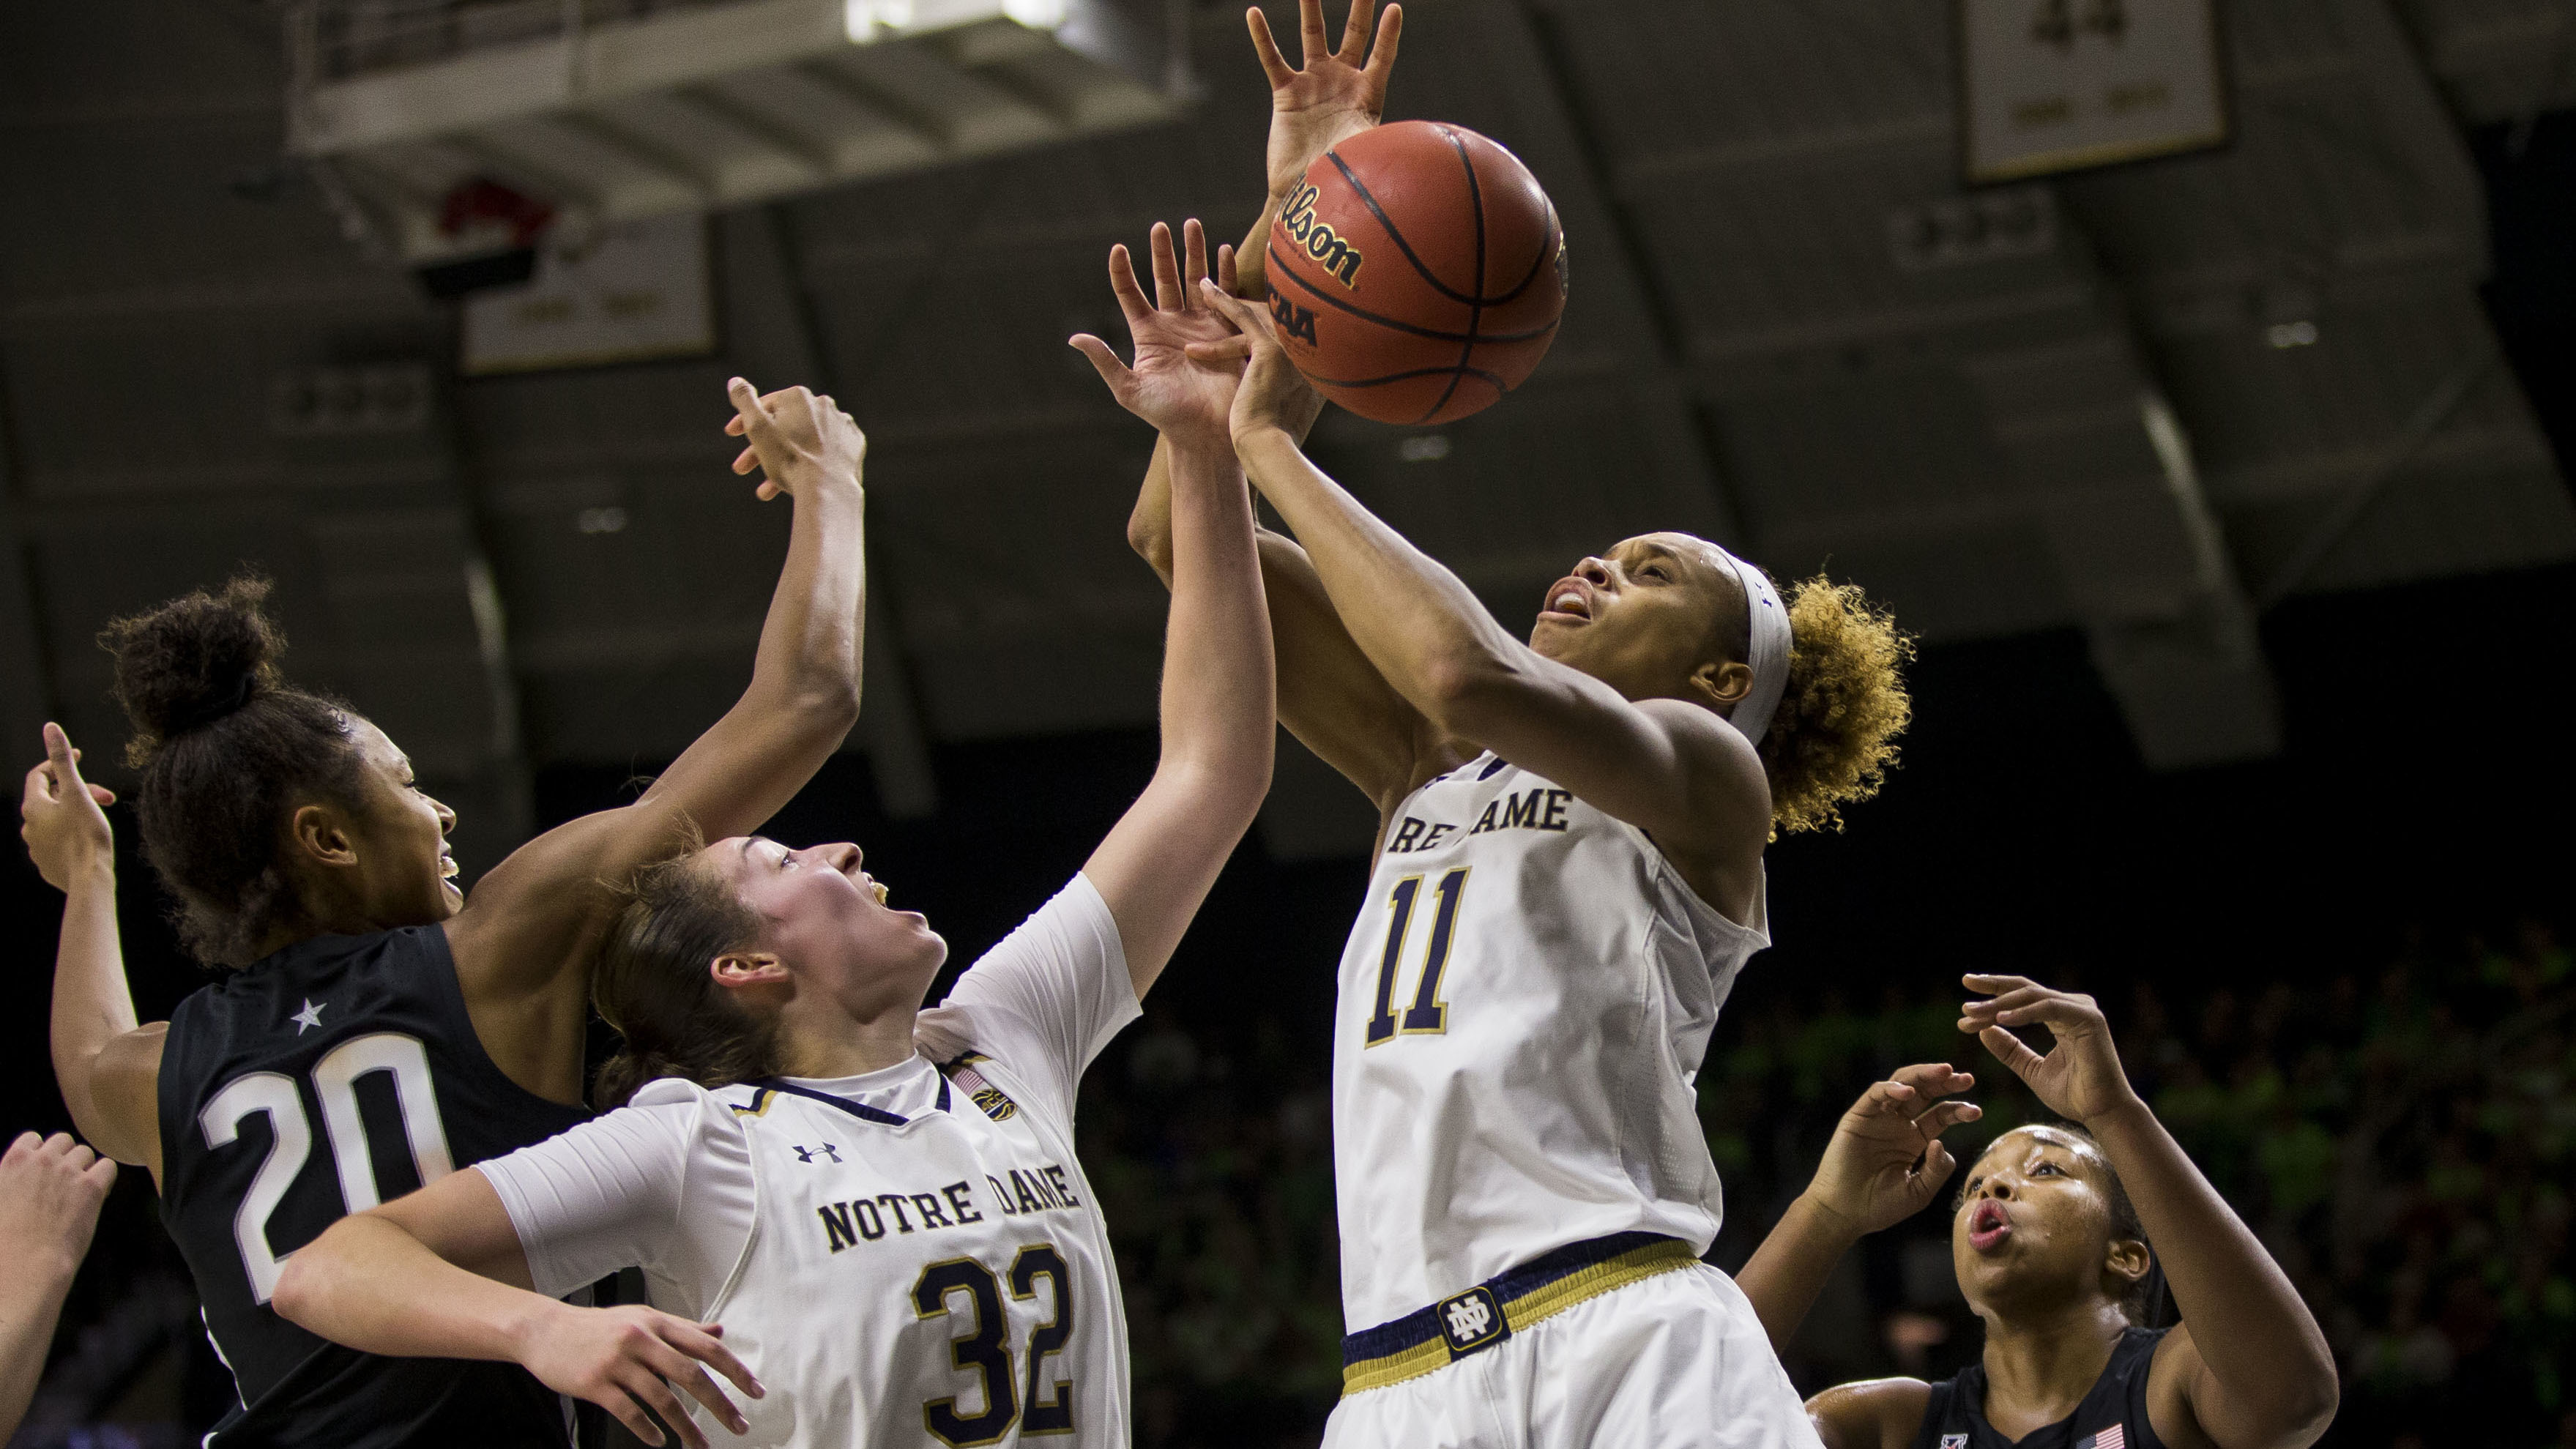 Notre Dame vs. UConn in the NCAAW Basketball Final Four